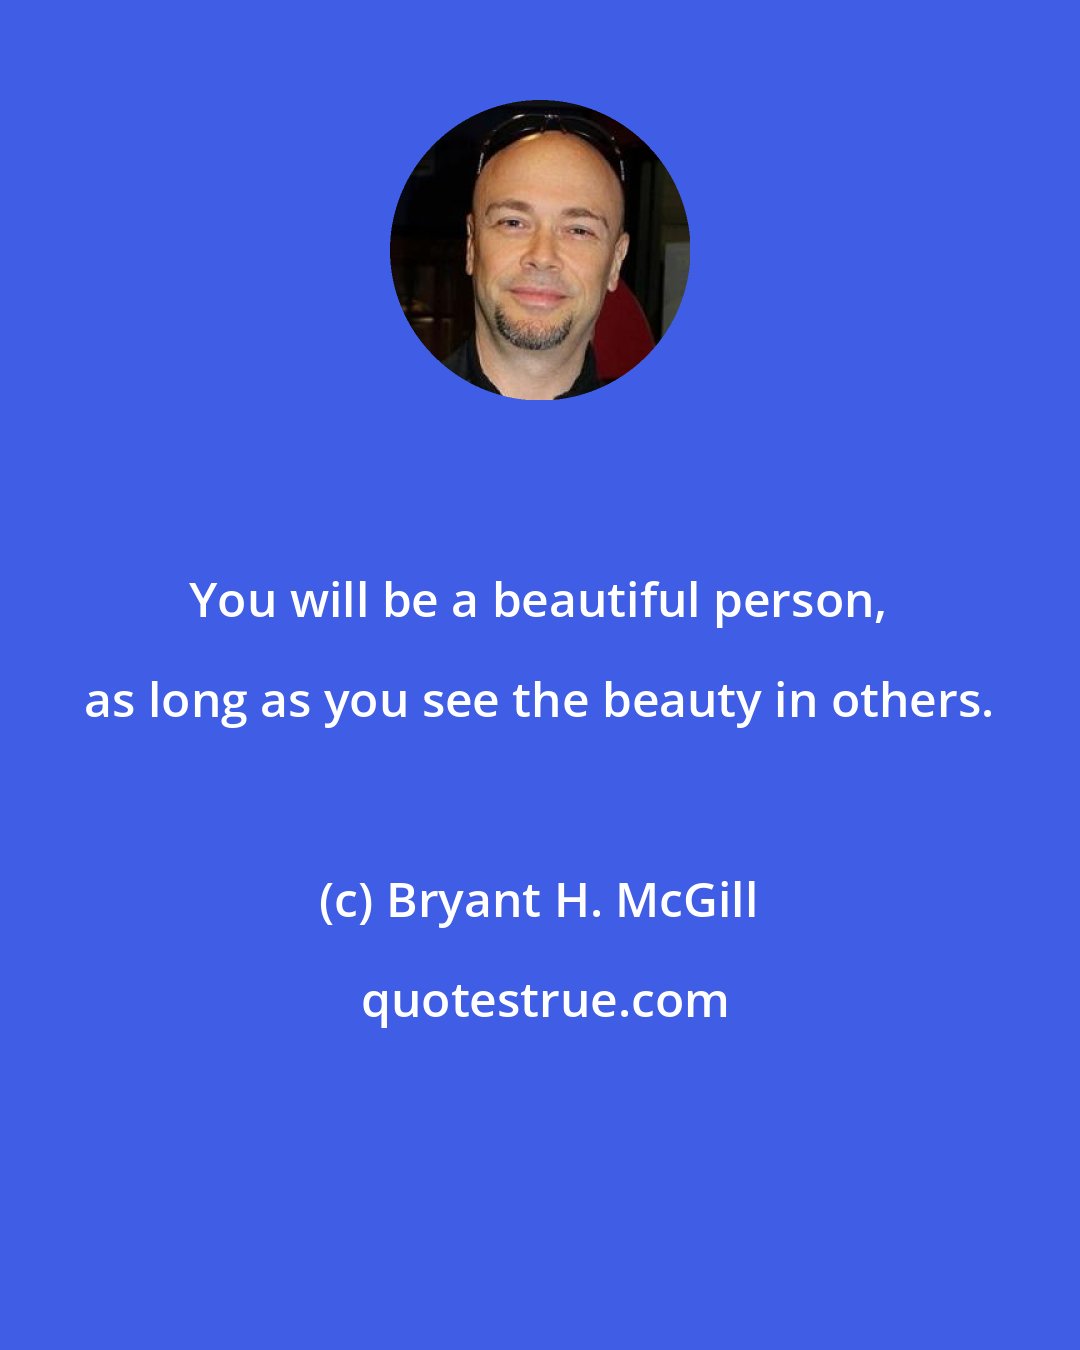 Bryant H. McGill: You will be a beautiful person, as long as you see the beauty in others.